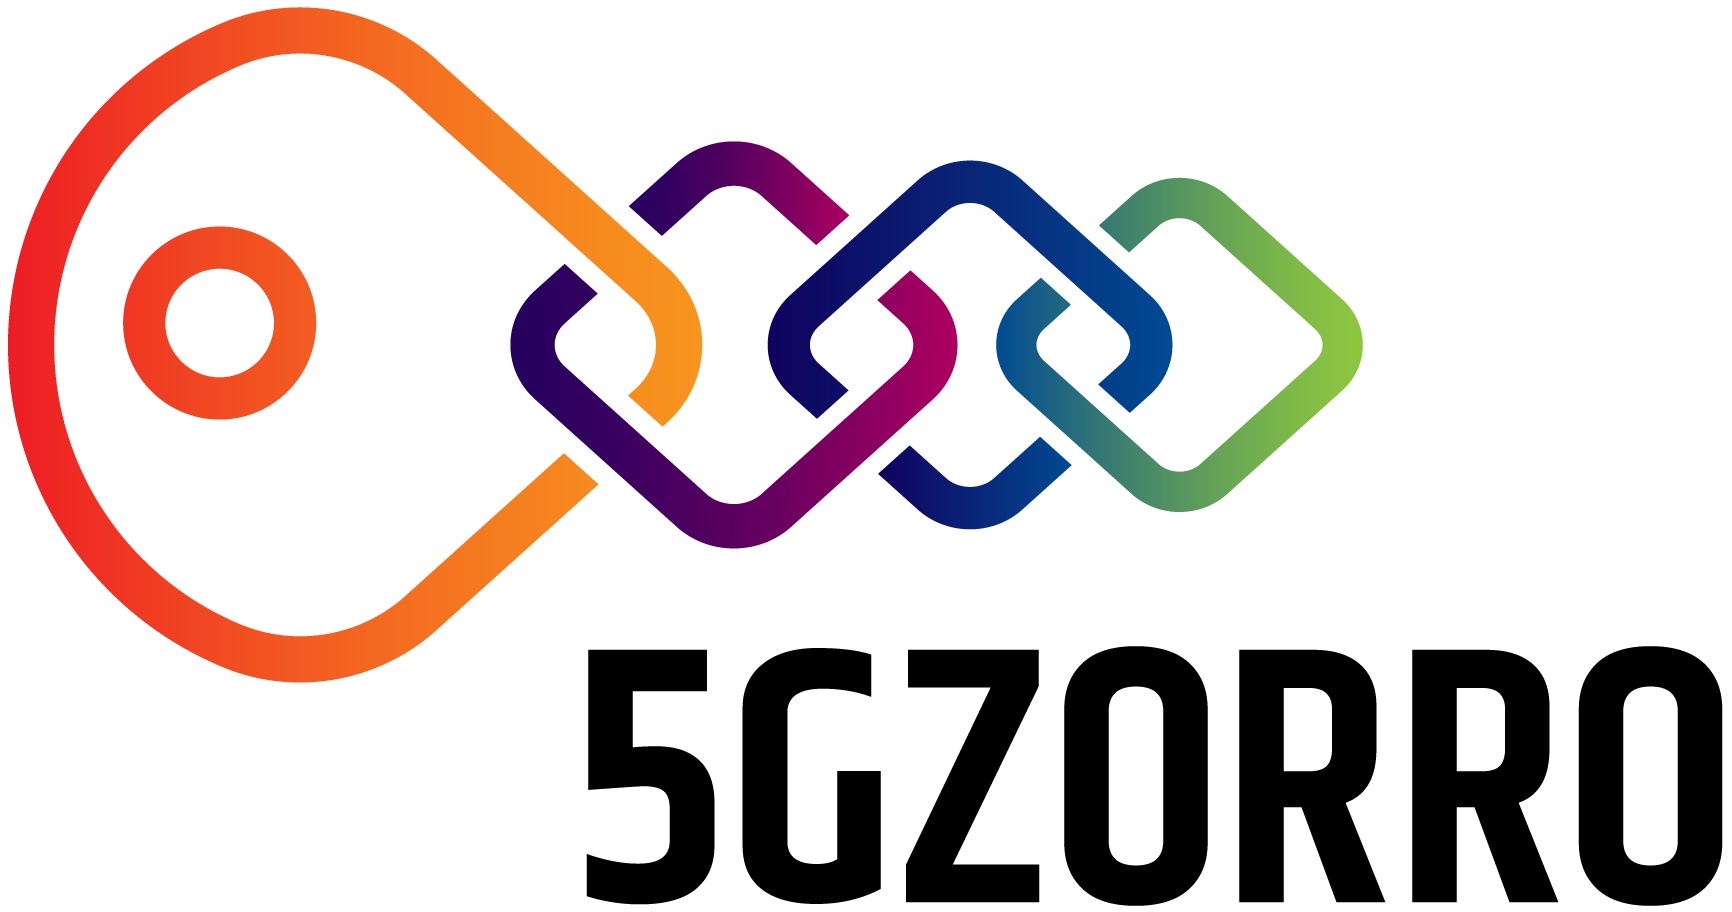 5GZORRO – Zero-Touch Security and Trust for Ubiquitous Computing and Connectivity in 5G Networks